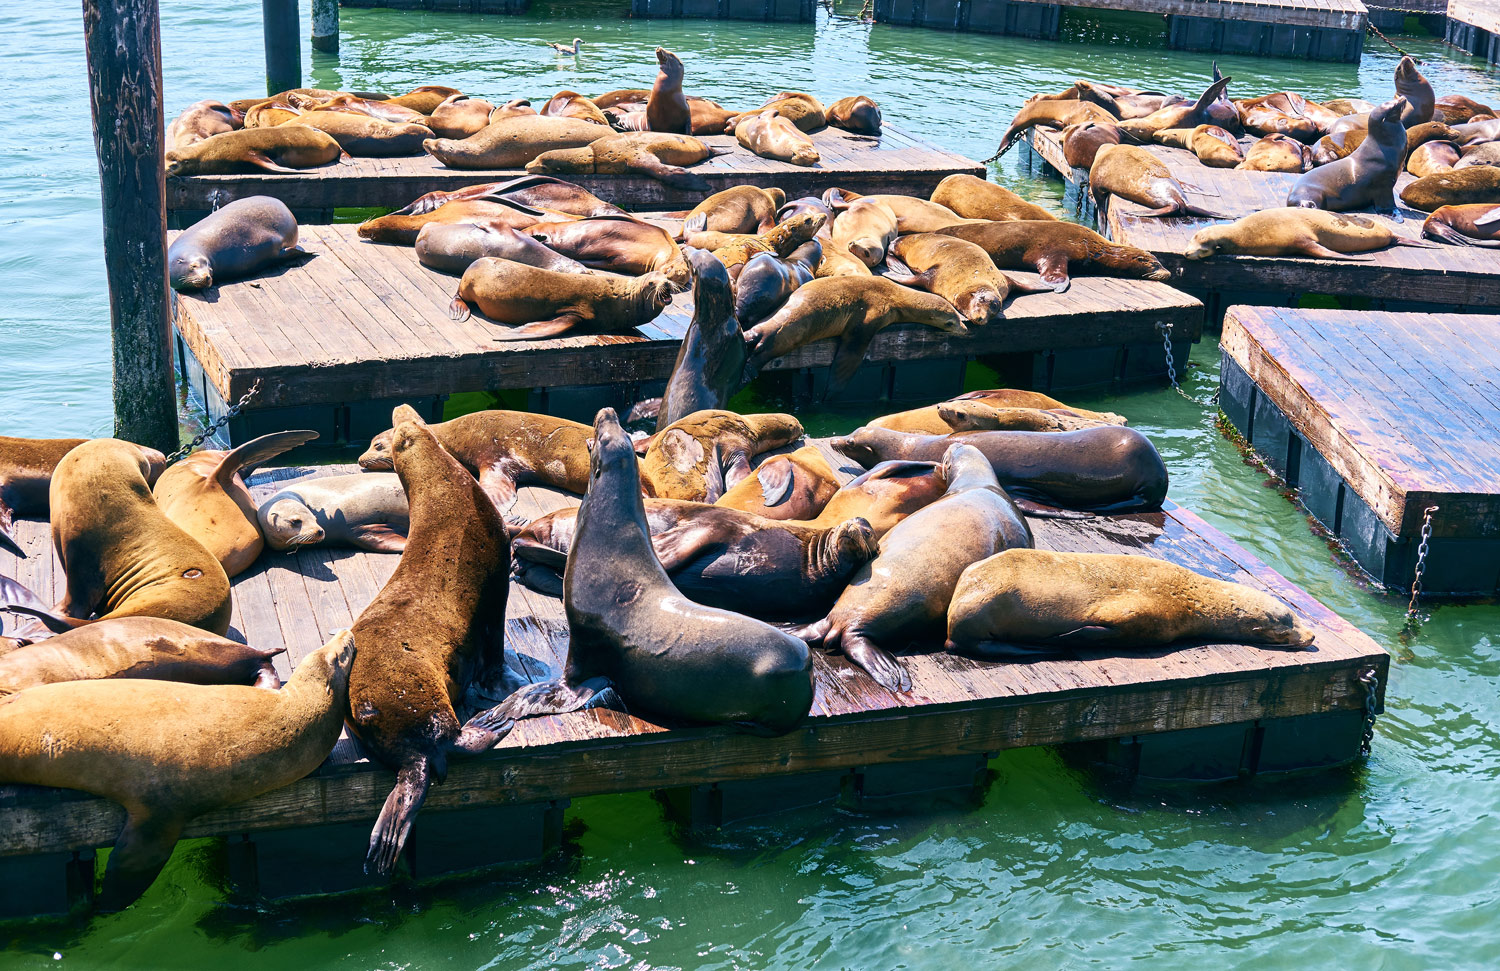 Pier 39 San Francisco (A Great Place To See Sea Lions